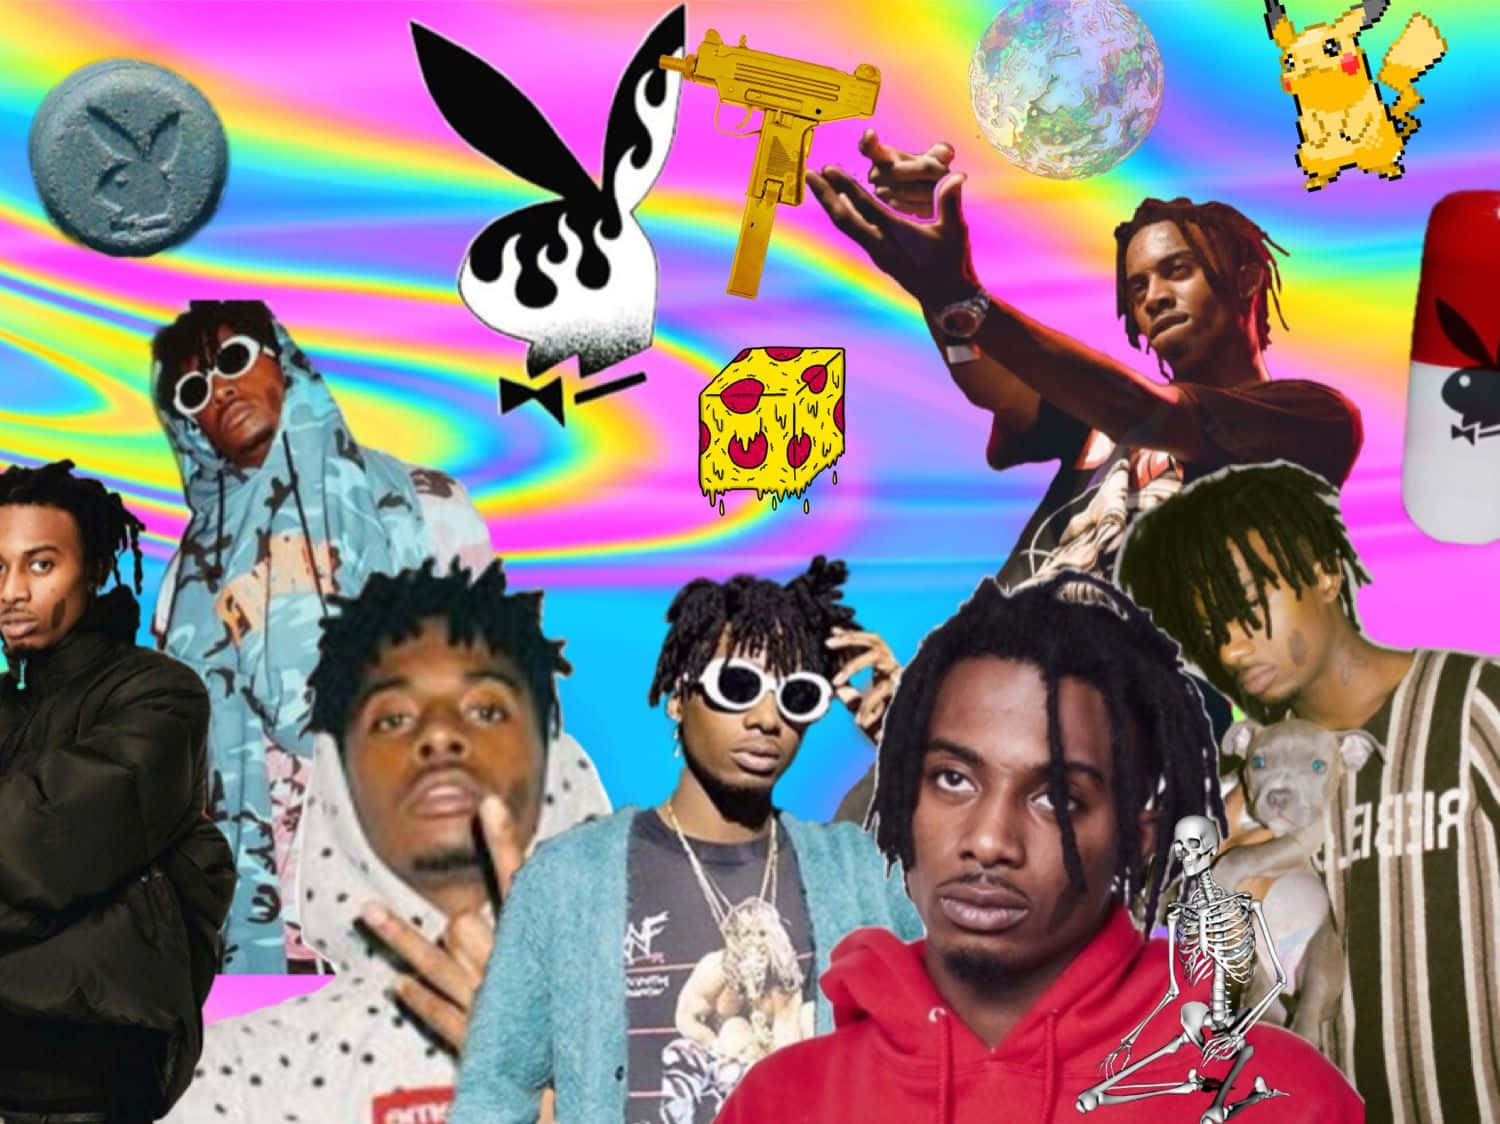 Playboi Carti Pc in All Its Glory Wallpaper